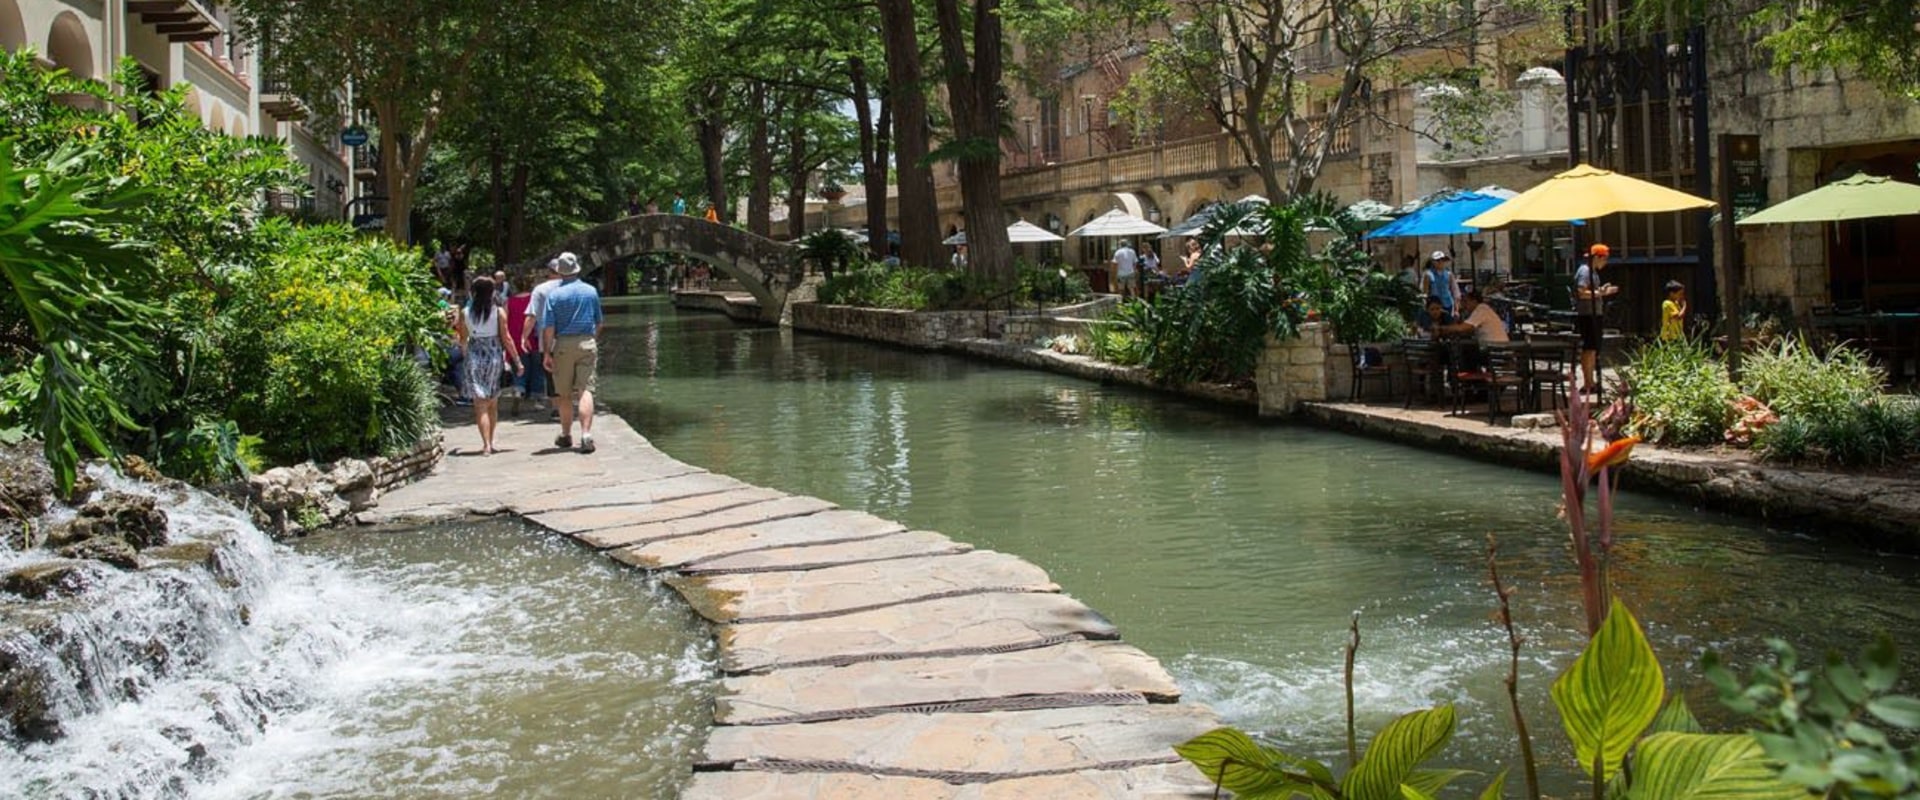 How many days should you spend in san antonio?